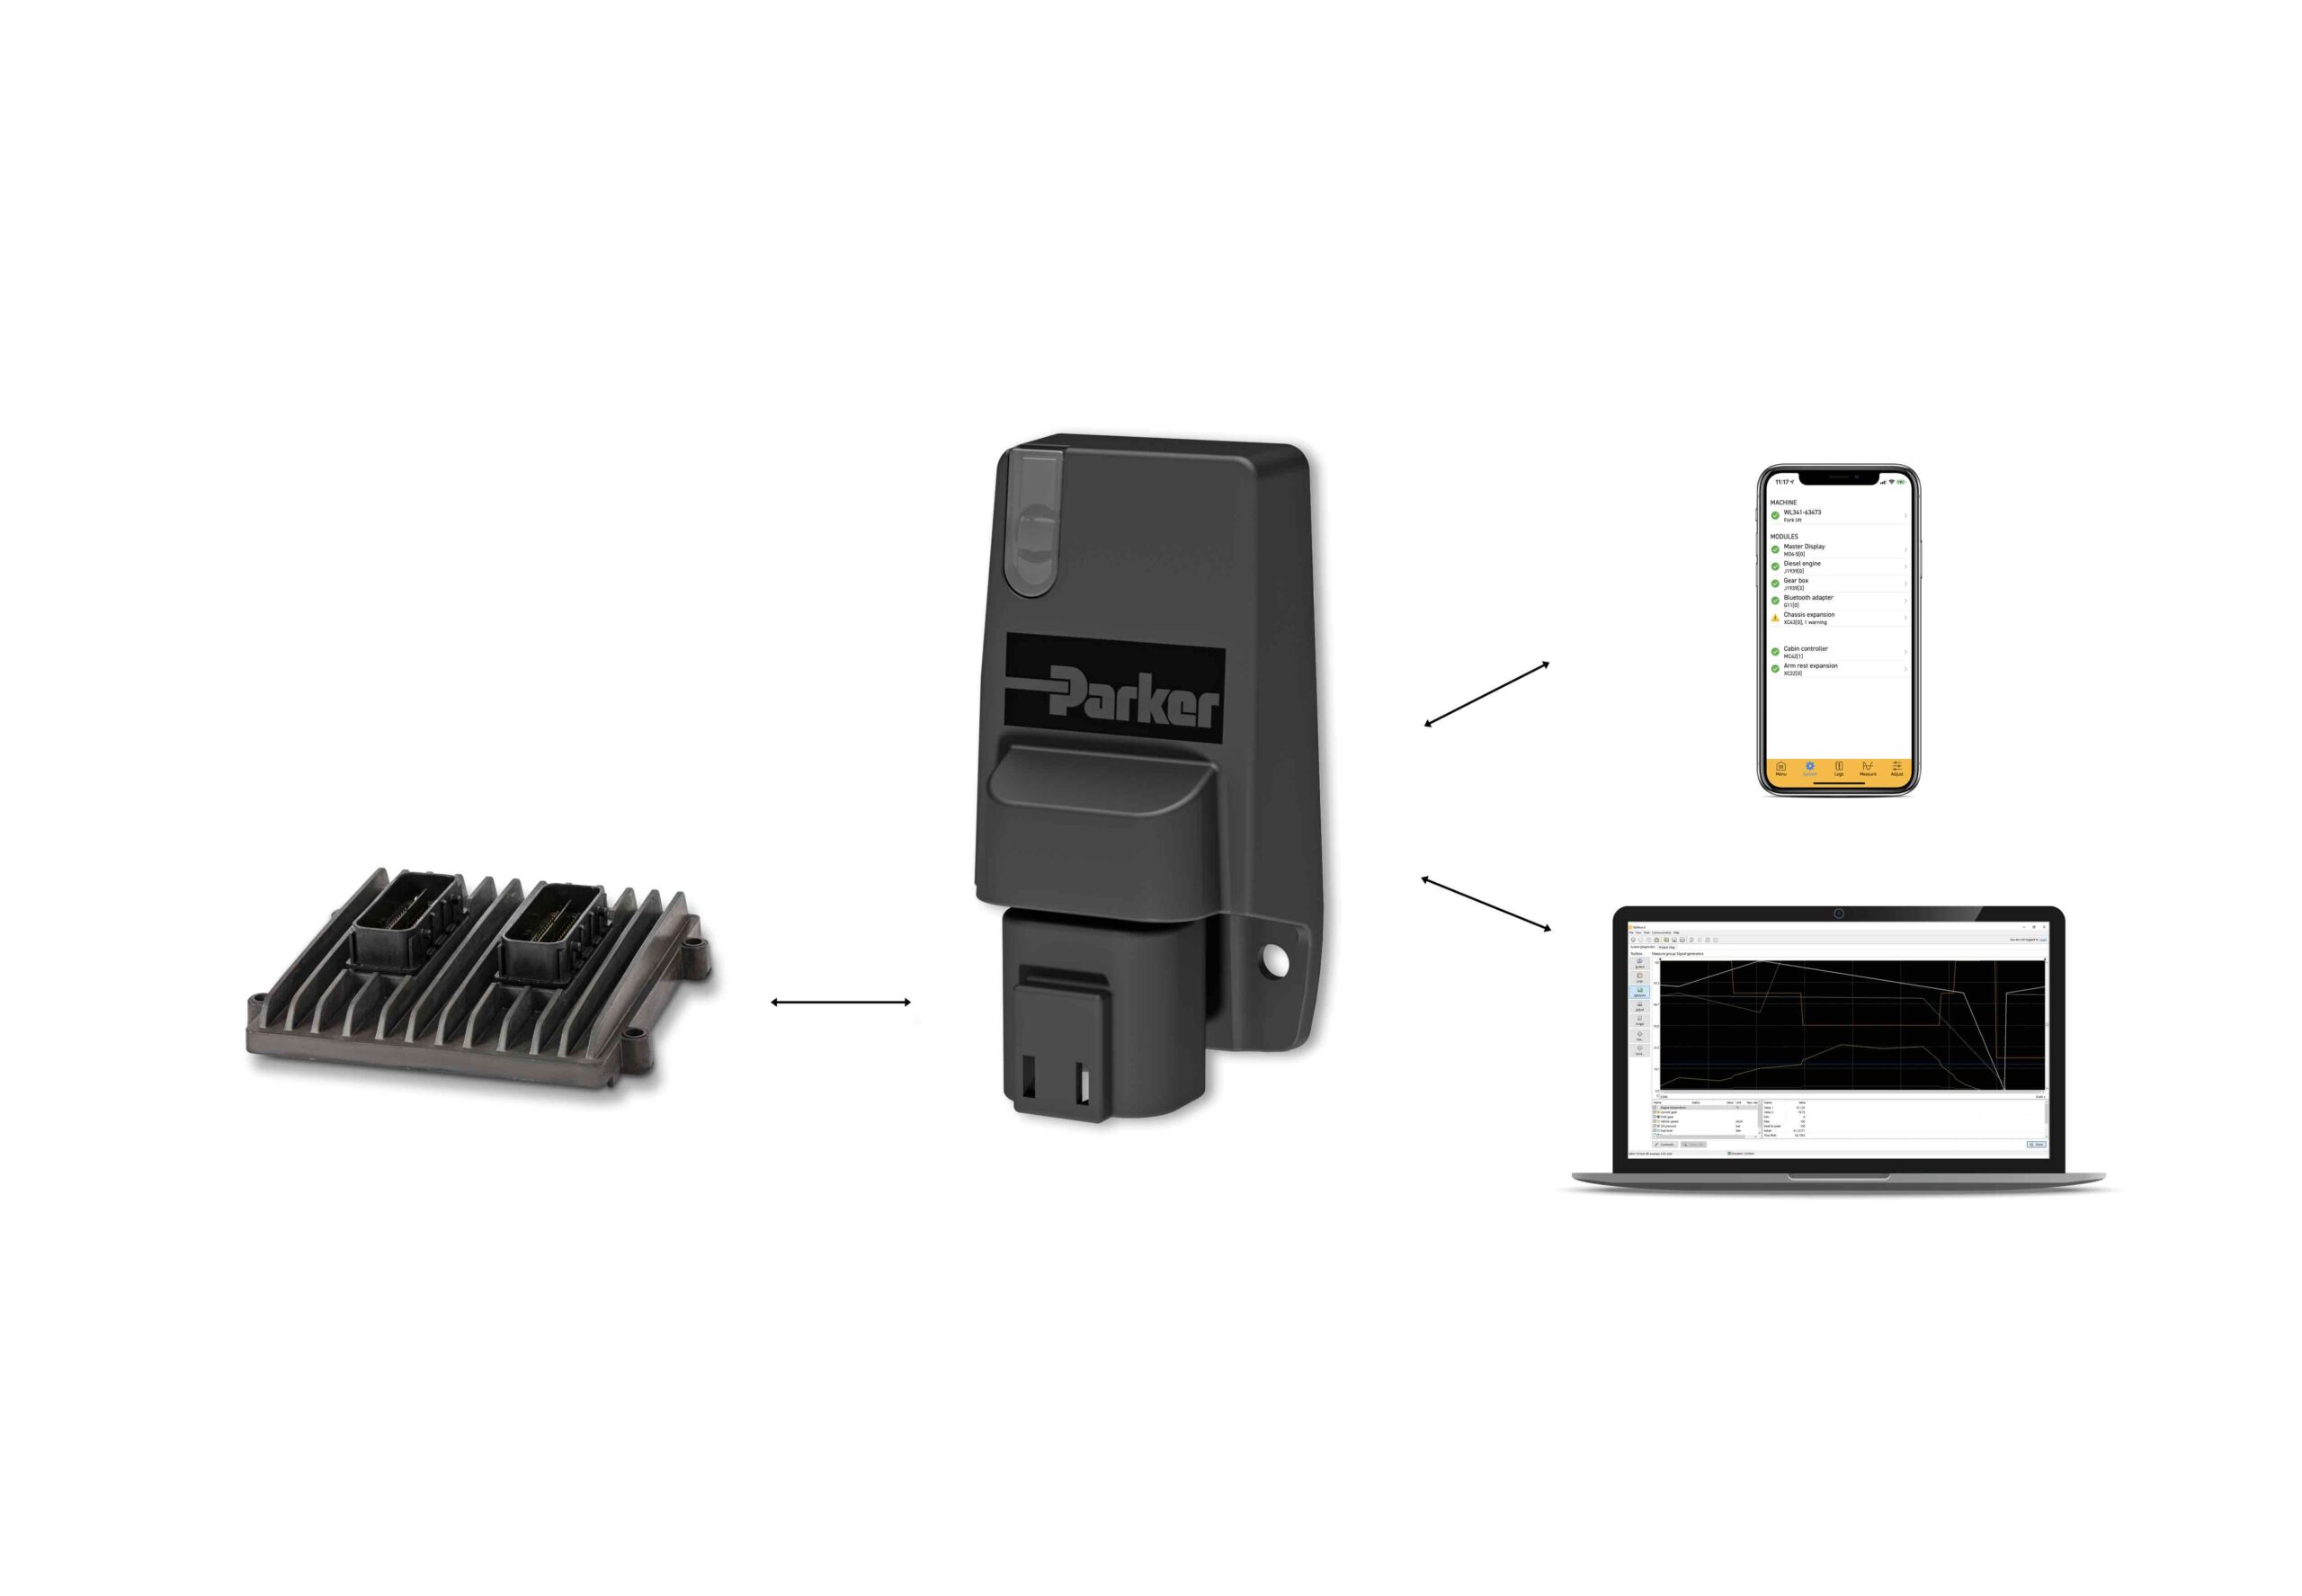 CAN gateway module that uses Bluetooth for system diagnostics on-site or remotely